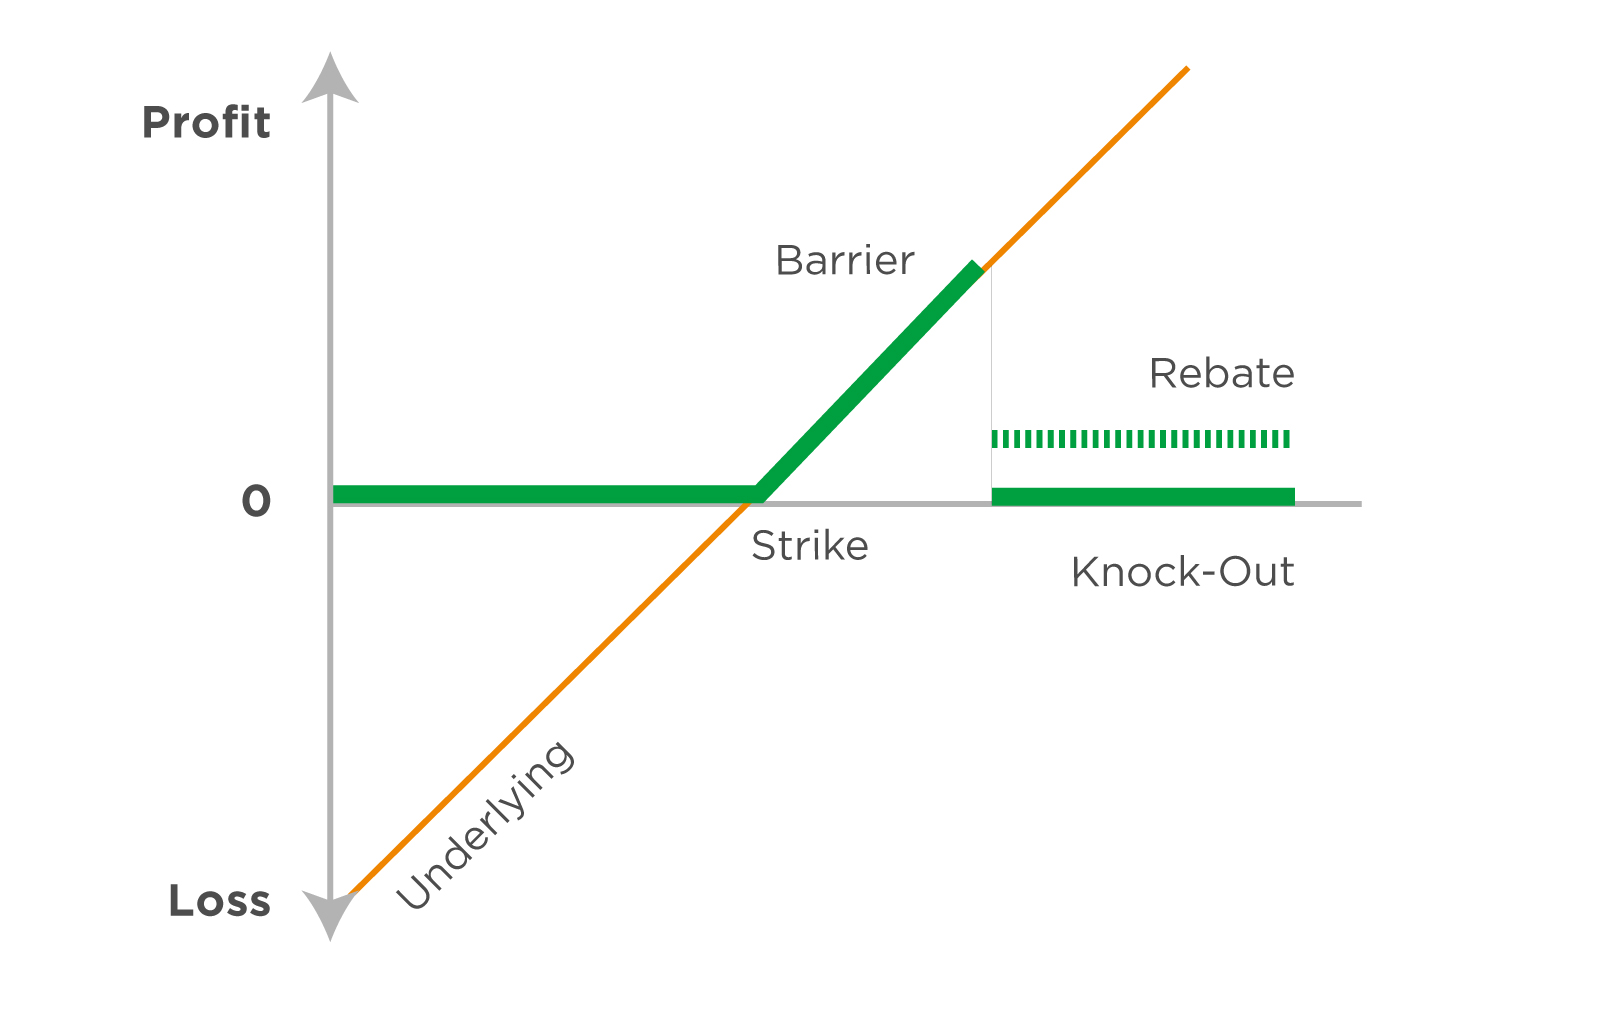 Understanding the Pros and Cons of Knock-Out Options